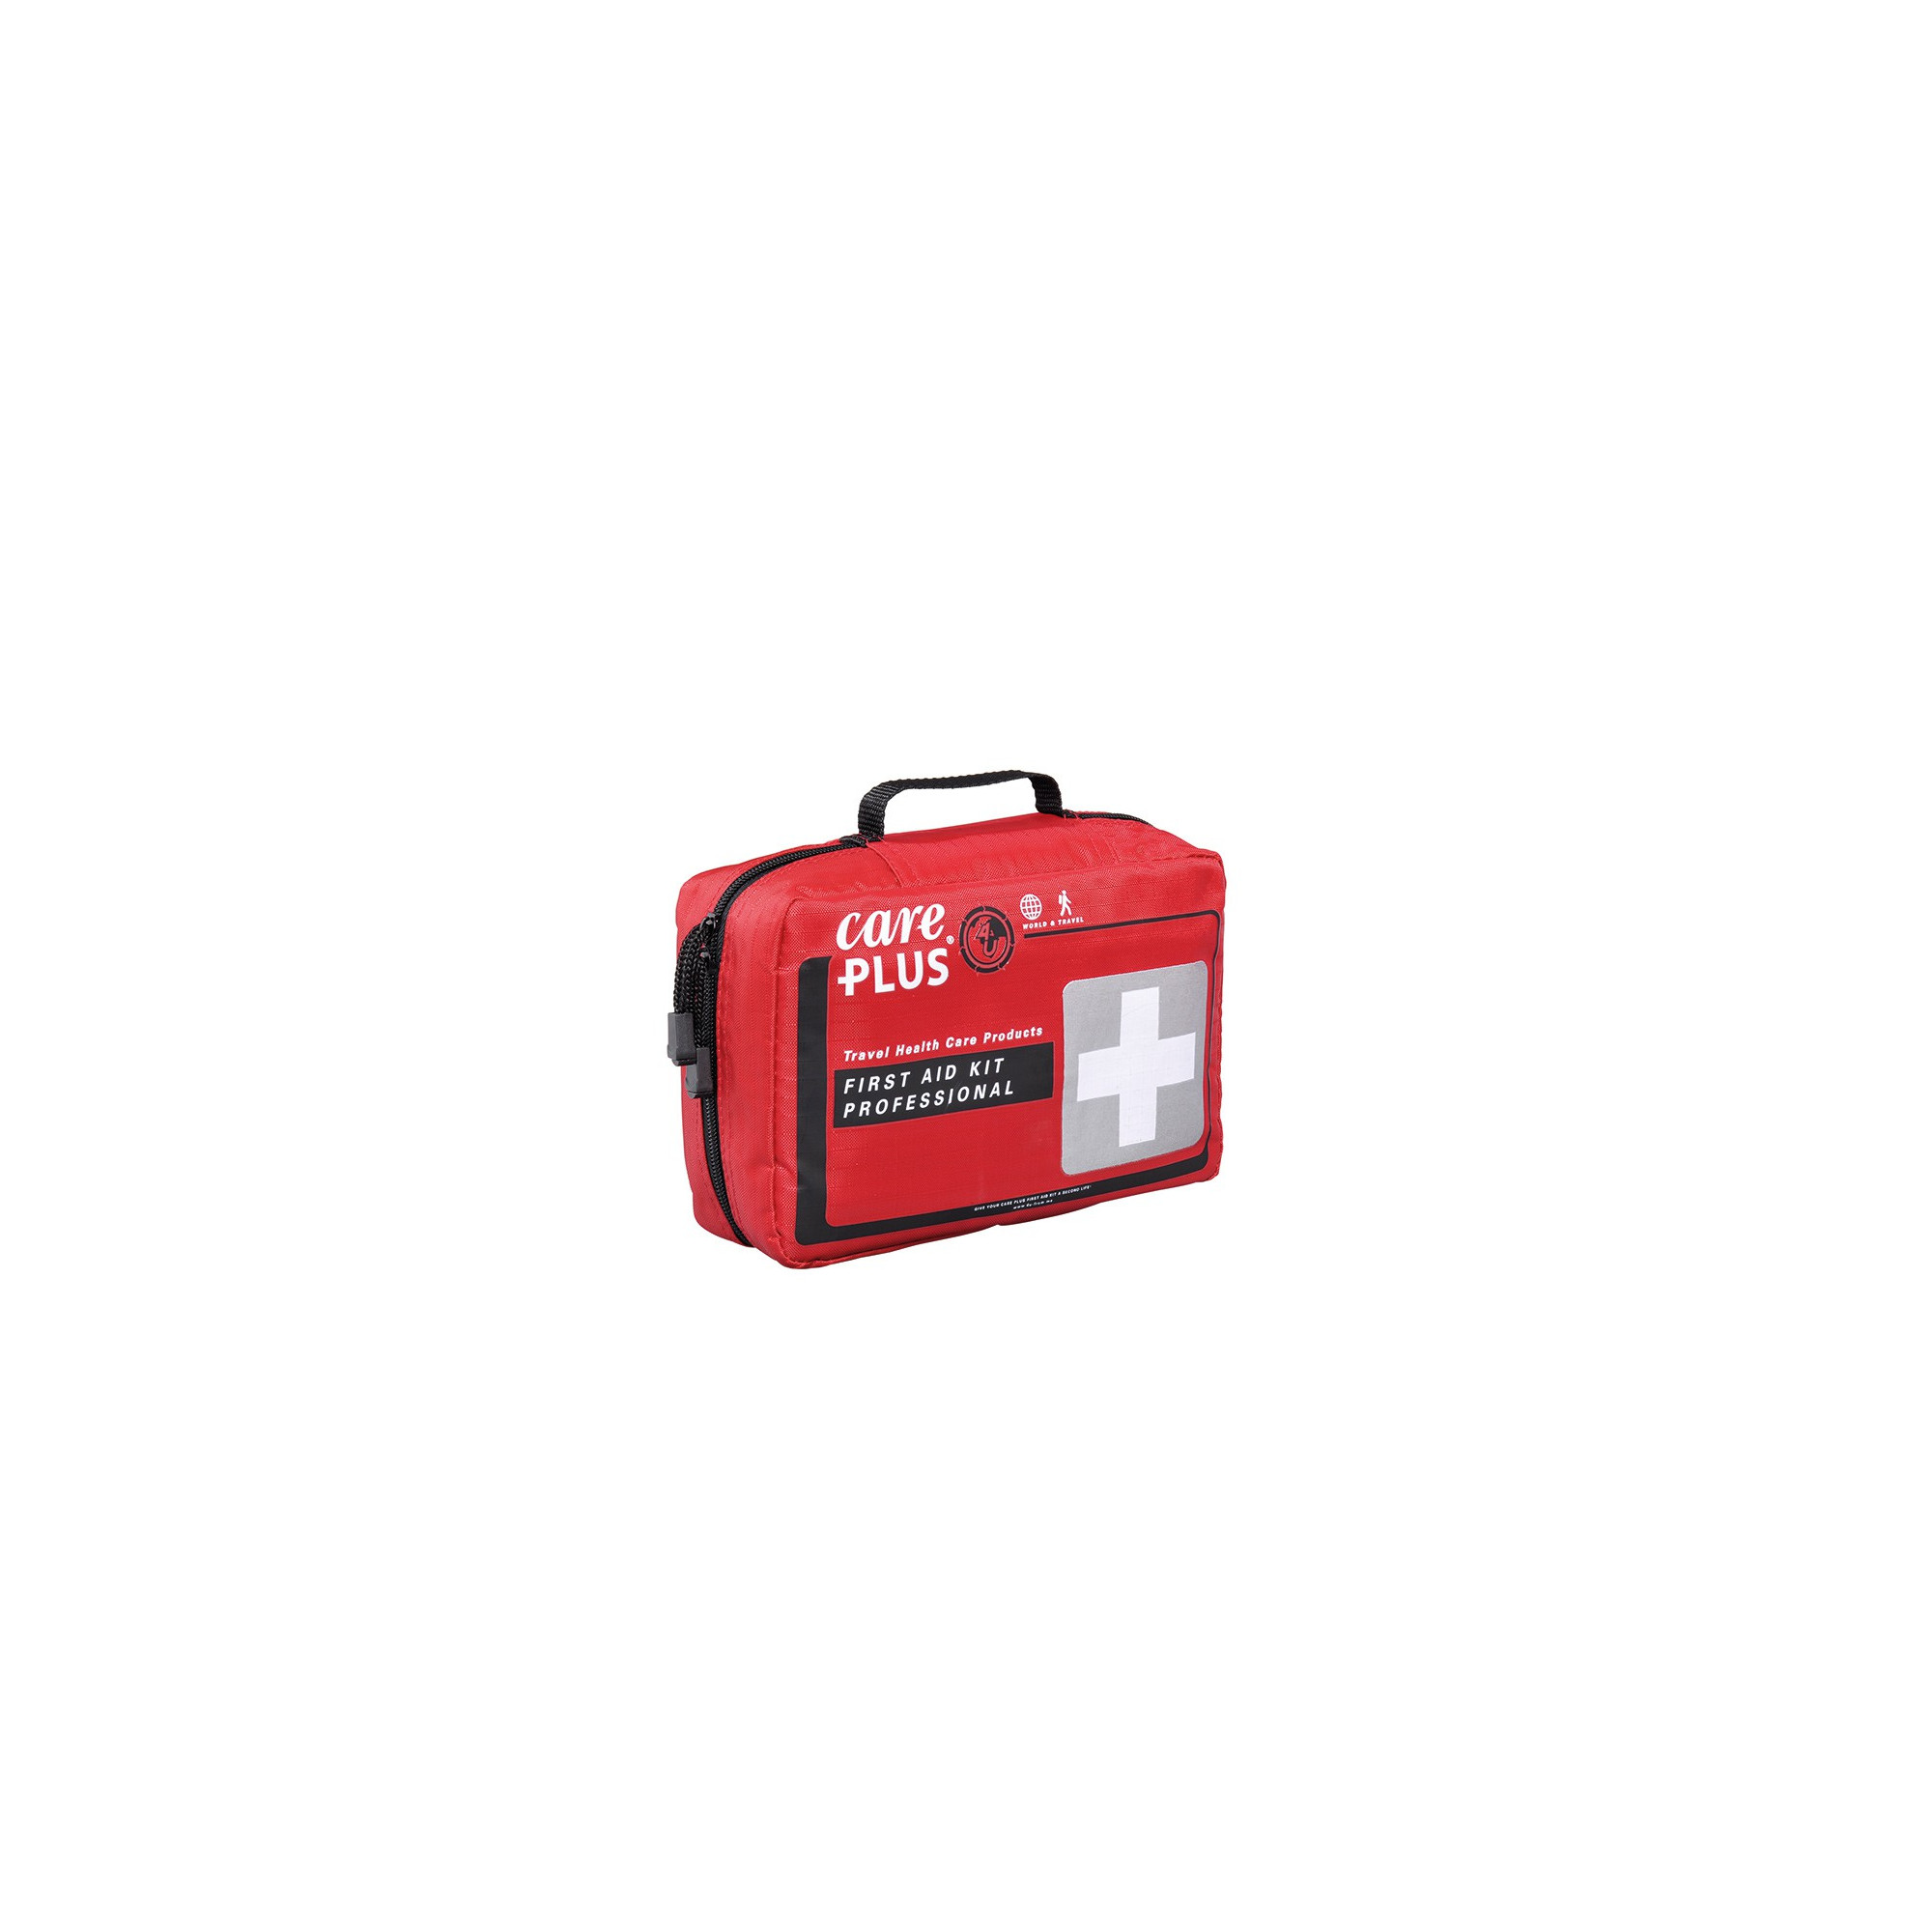 Professional CARE PLUS first aid kit